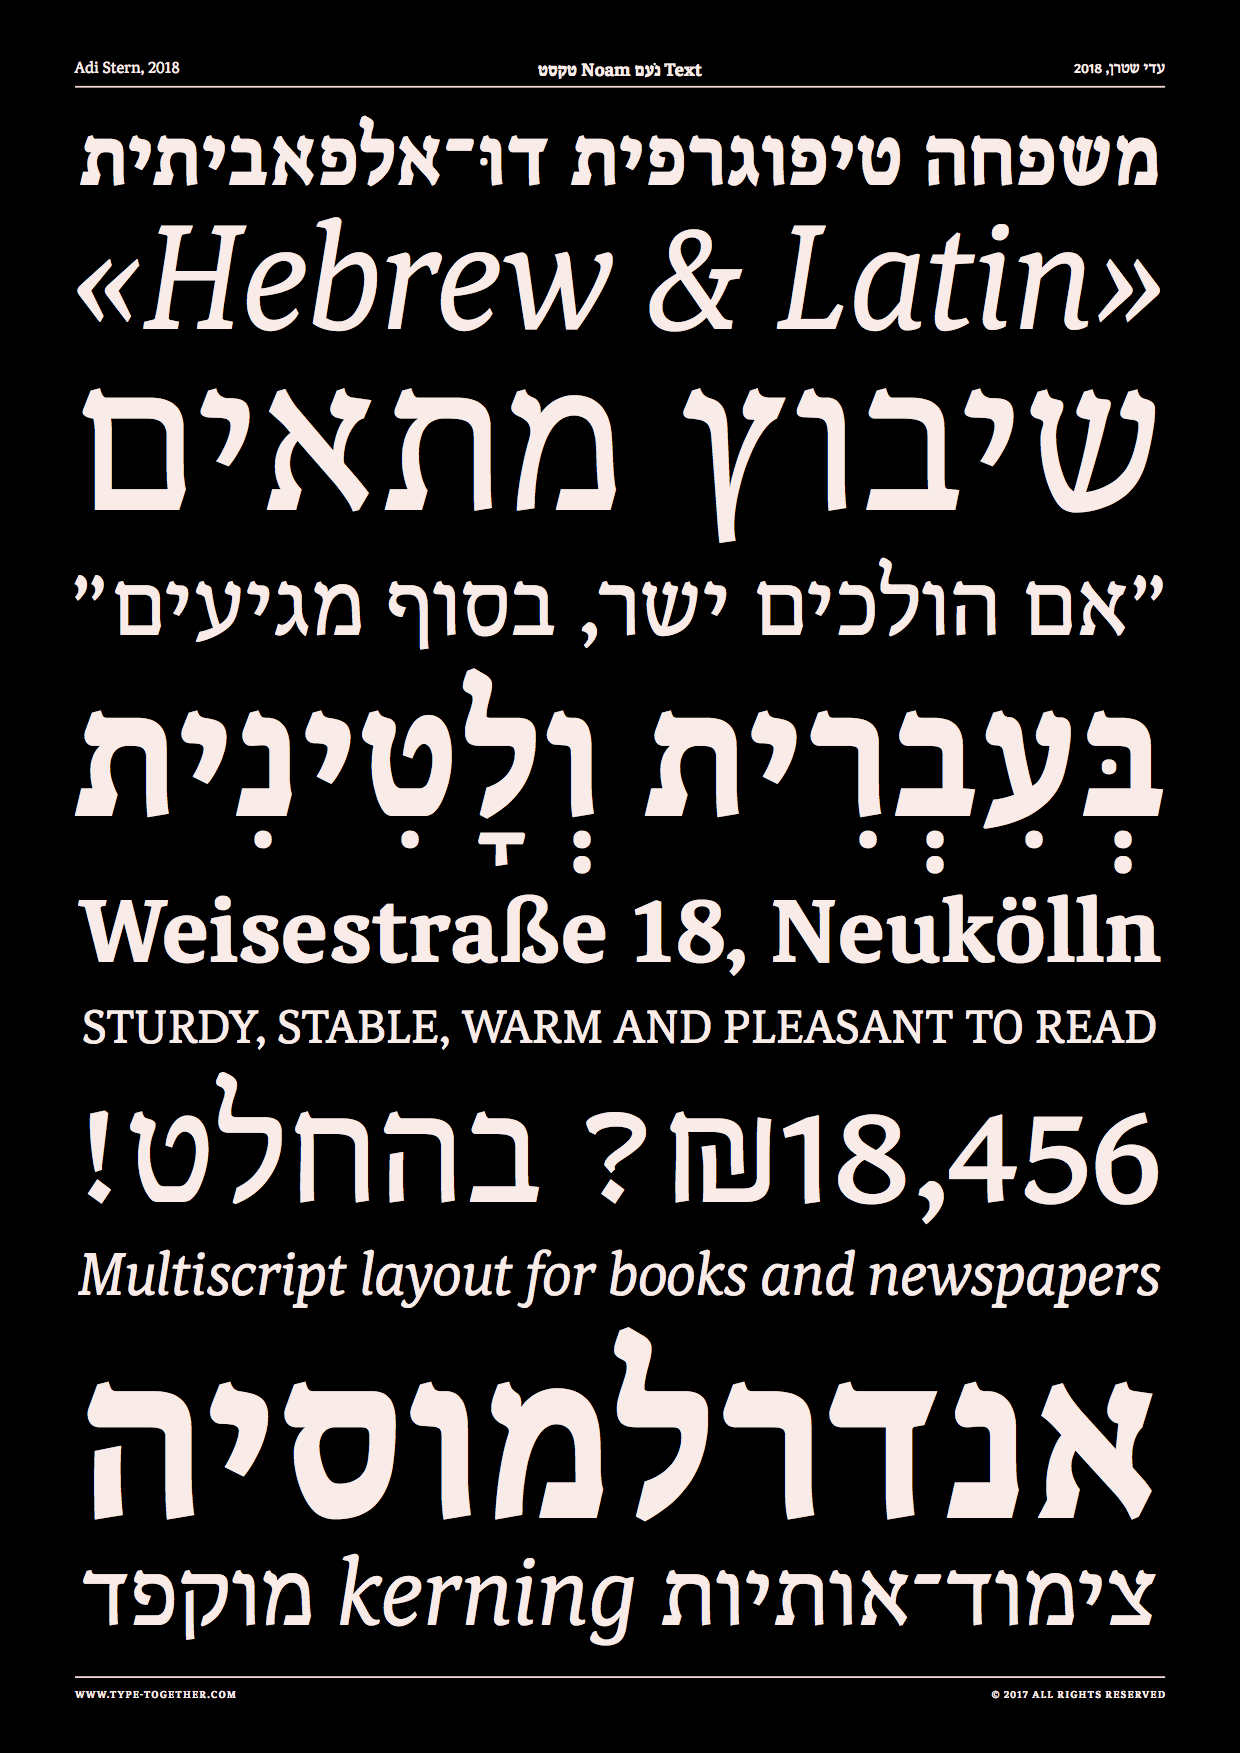 Noam Text launch event. Latin and Hebrew typeface